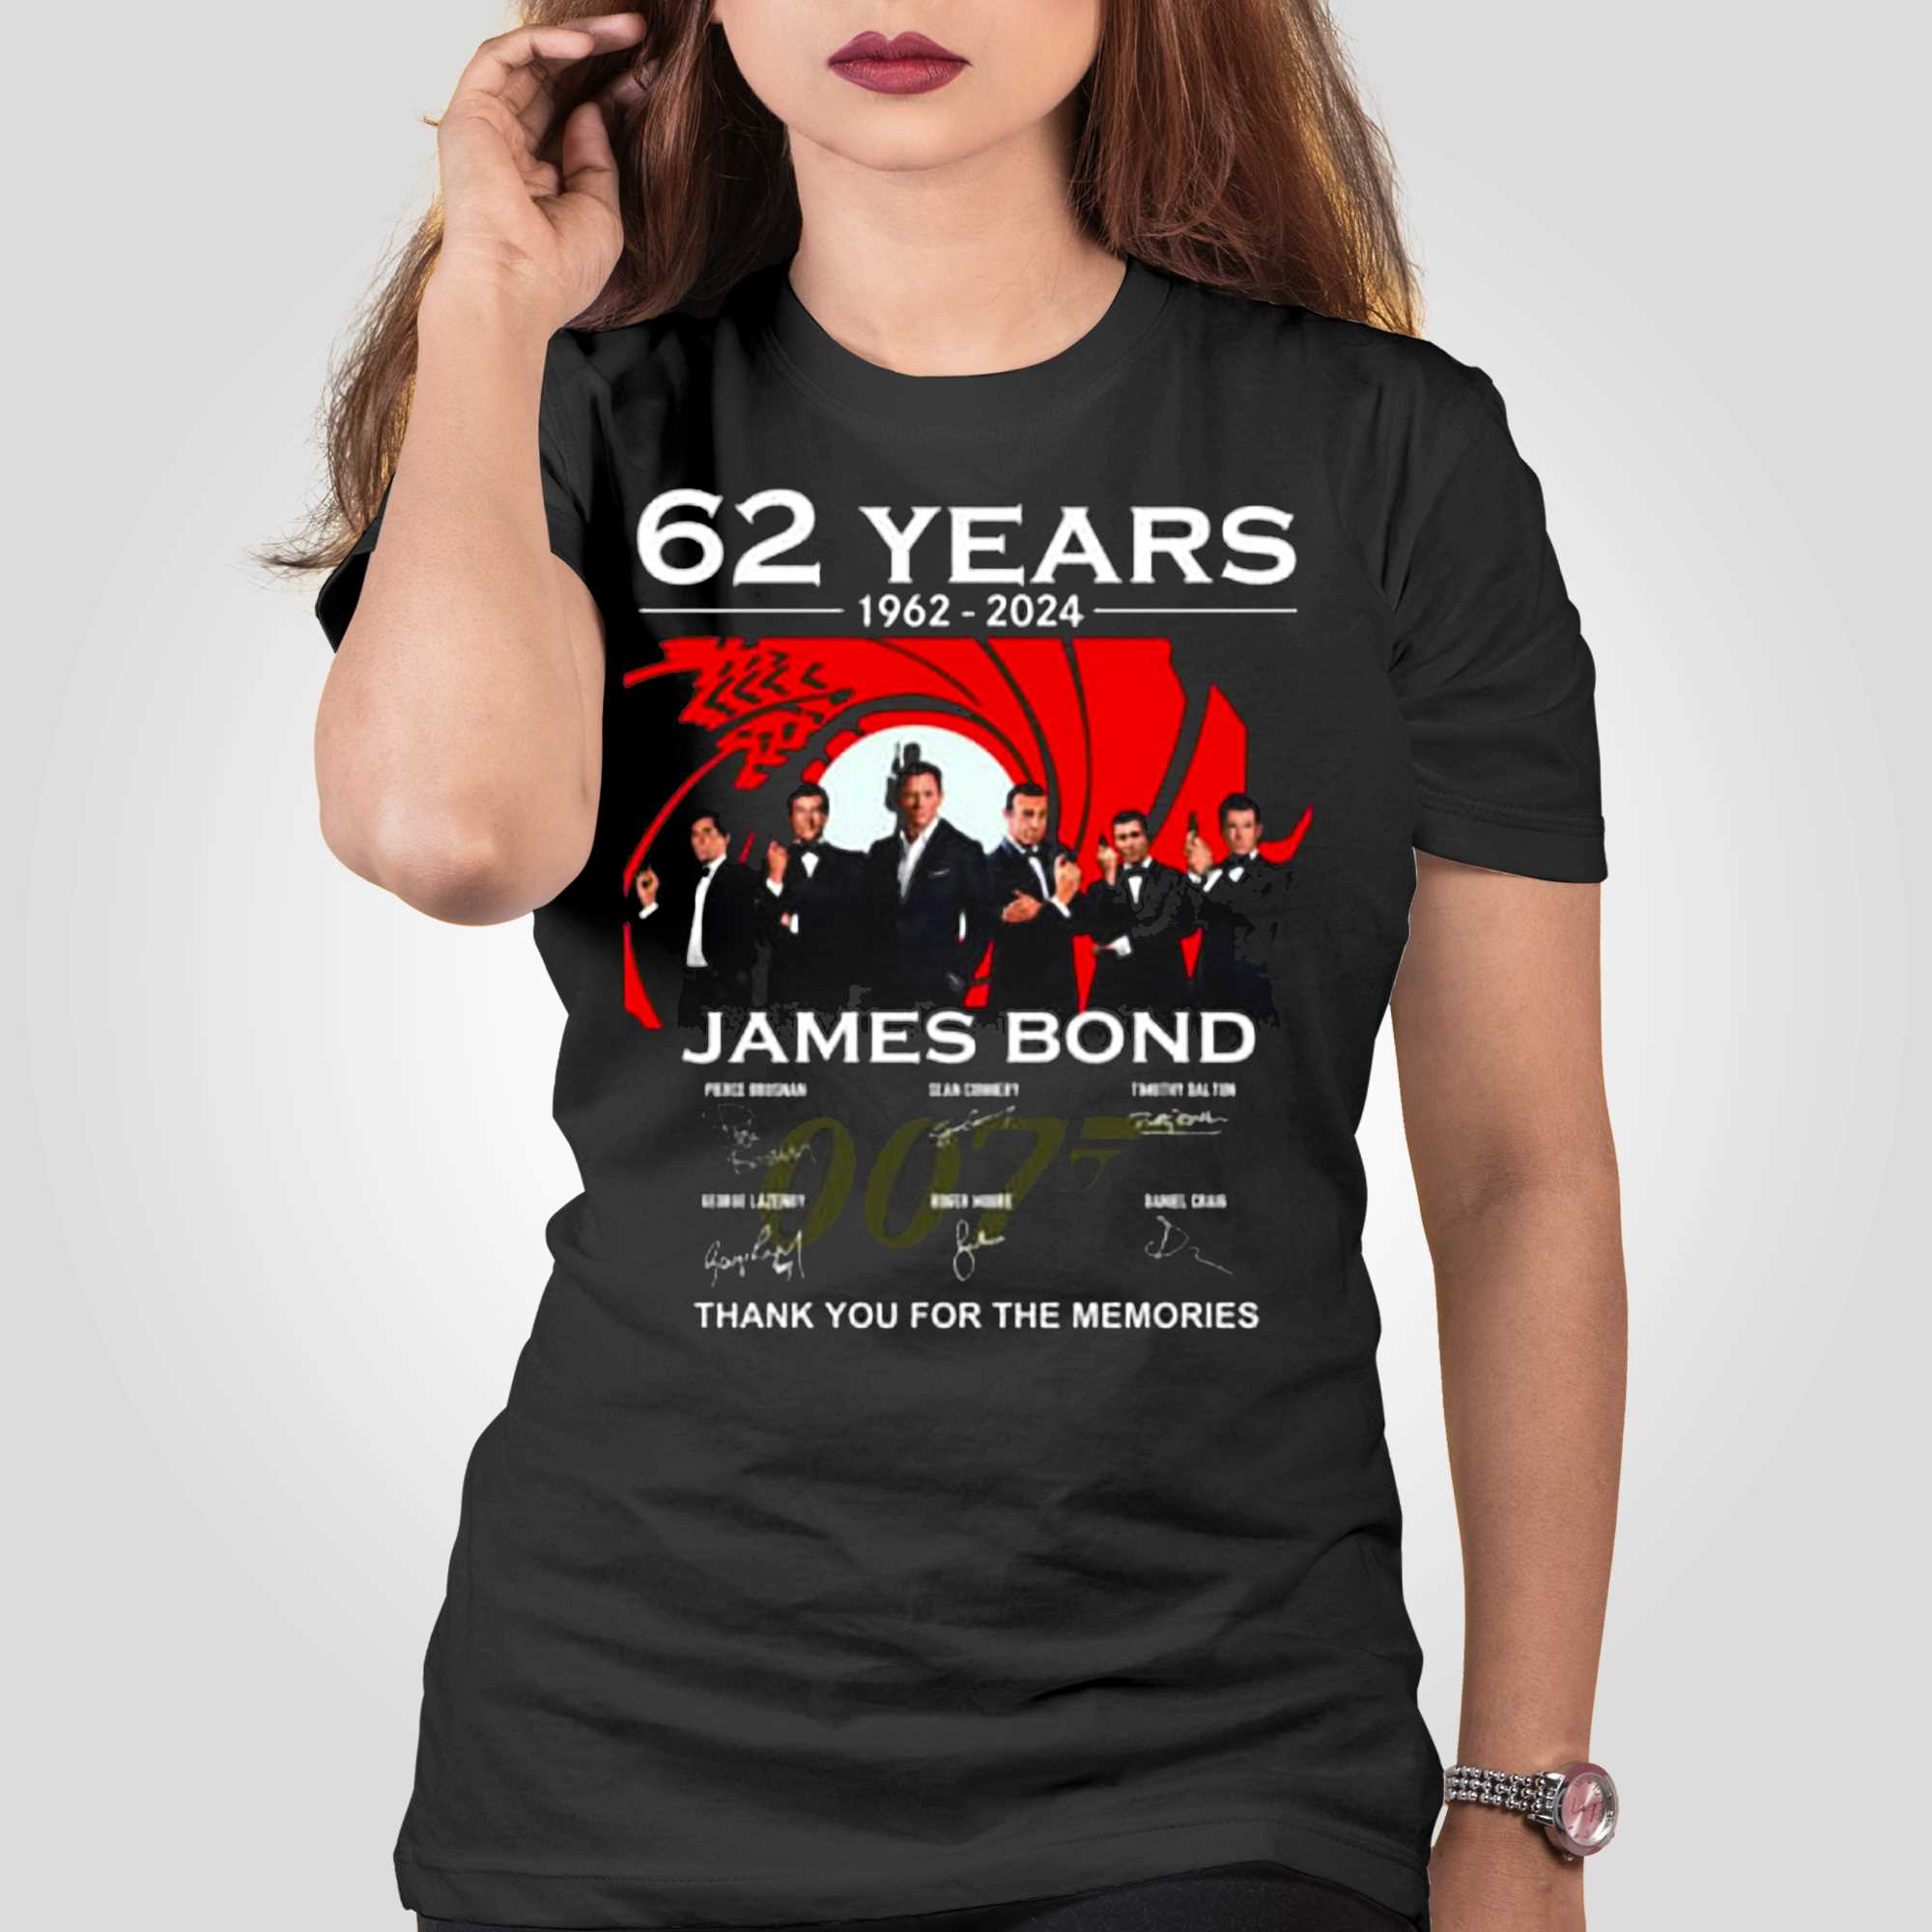 62-years-1962-2024-james-bond-thank-you-for-the-memories-t-shirt-2.jpg